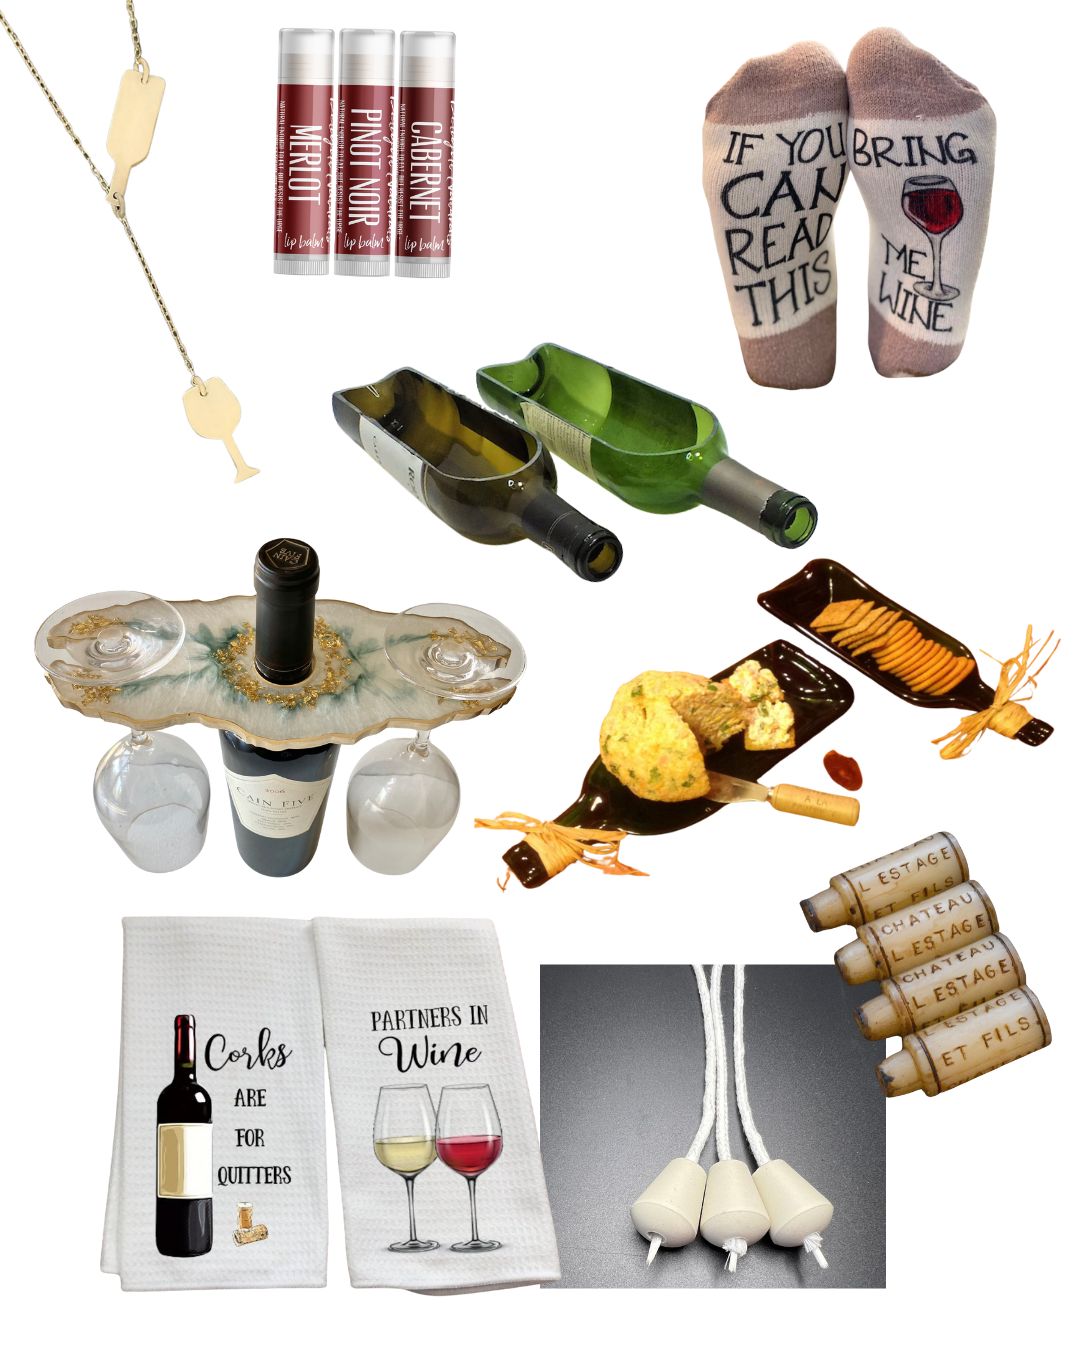 collage of wine oriented gifts or prizes including necklace, socks, kitchen towels, candles, wine bottle planter and more